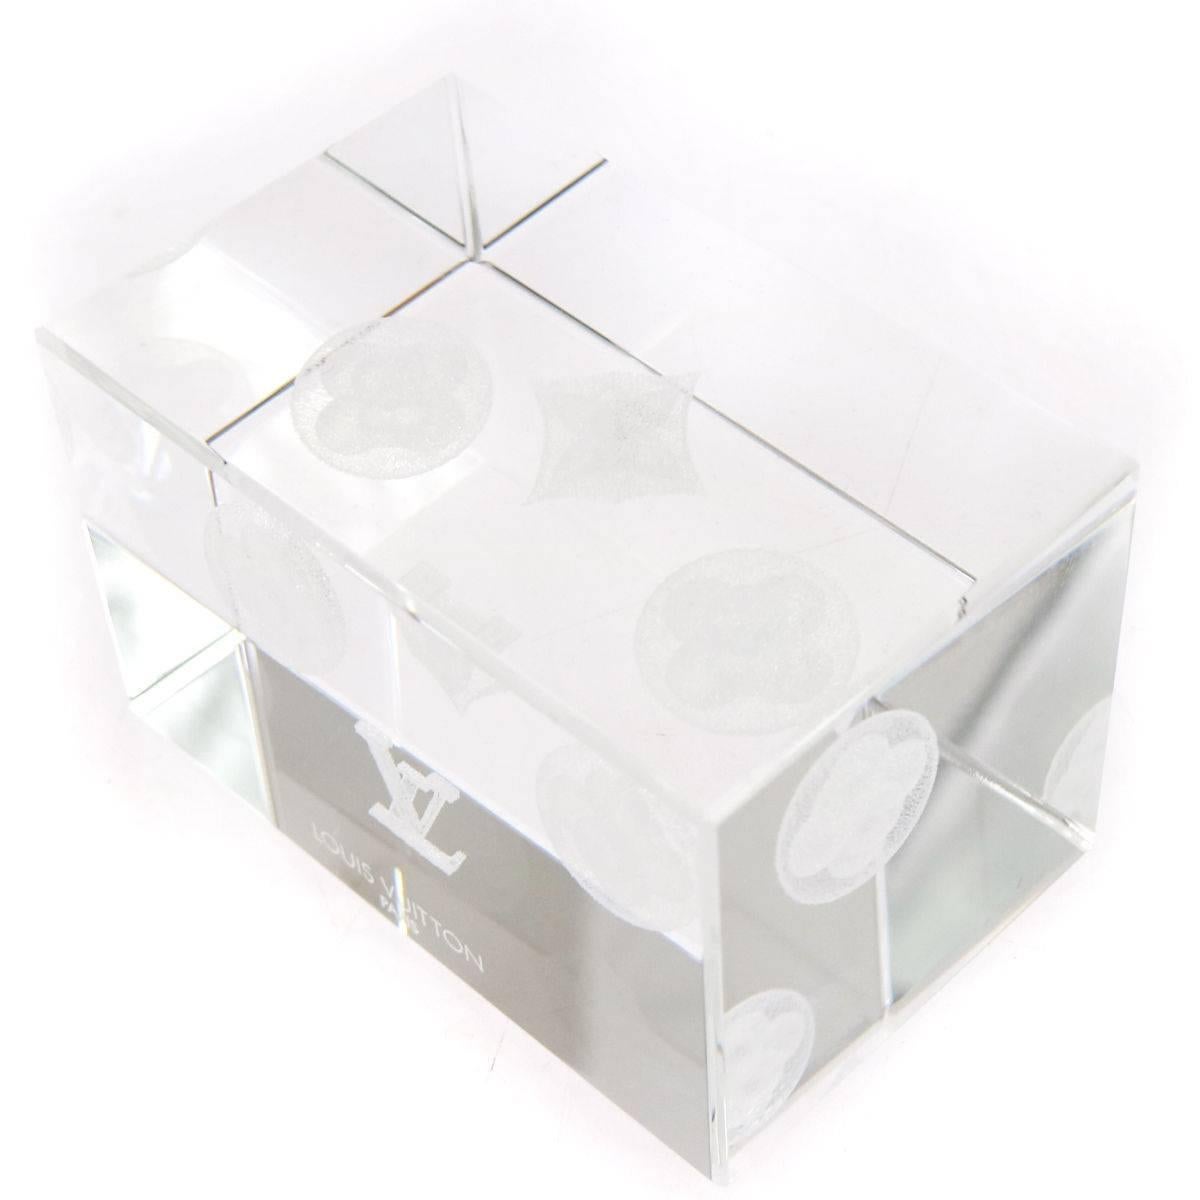 Gray Louis Vuitton NEW Monogram Crystal Desk Table Decorative Paper Weight in Box